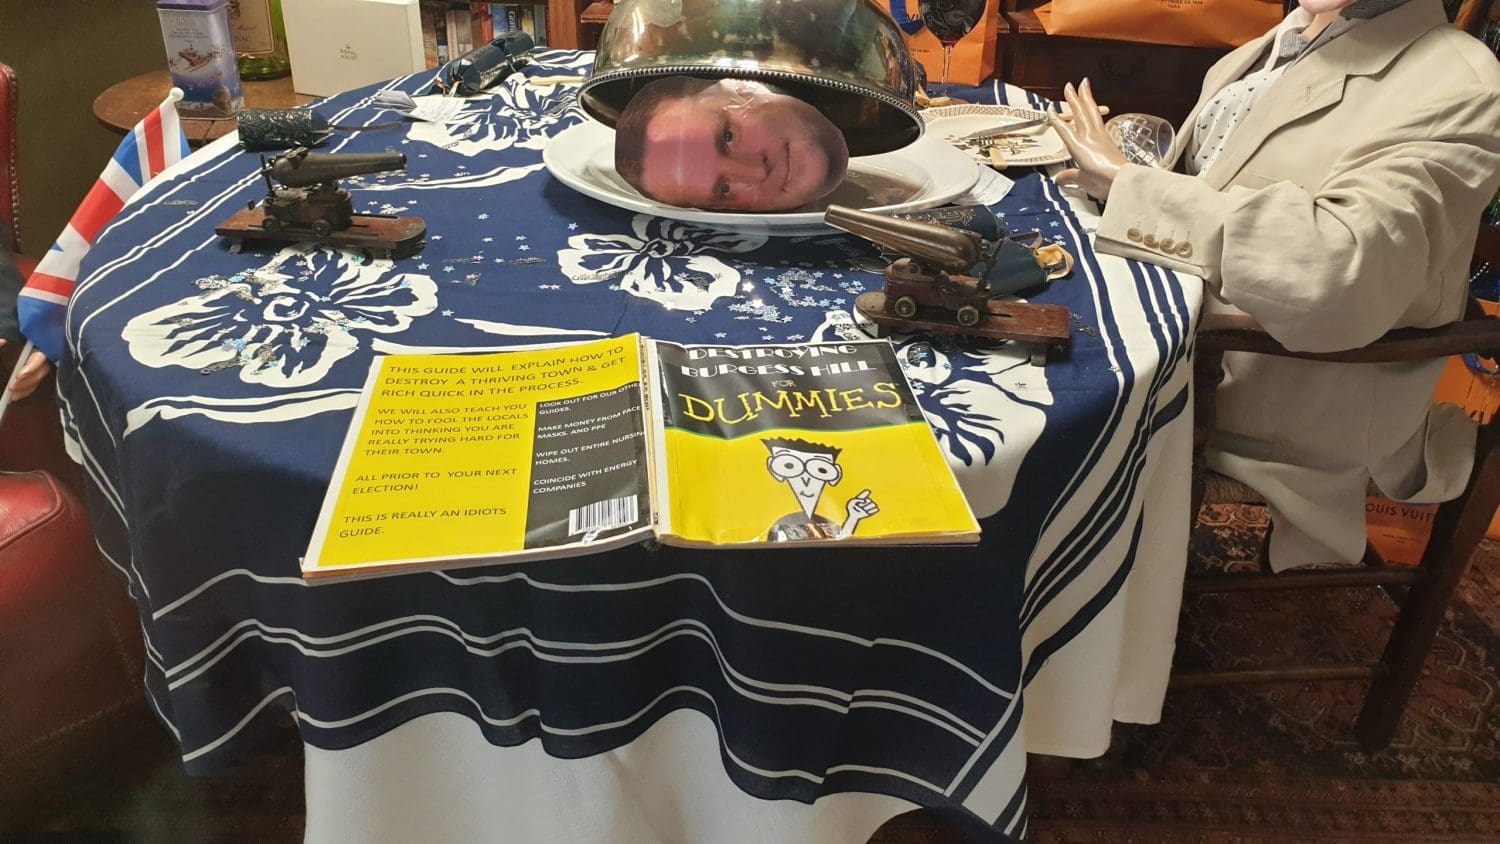 The Tories dining table with a book called "Destroy Burgess Hill for Dummies"aimed at the local Tory MP